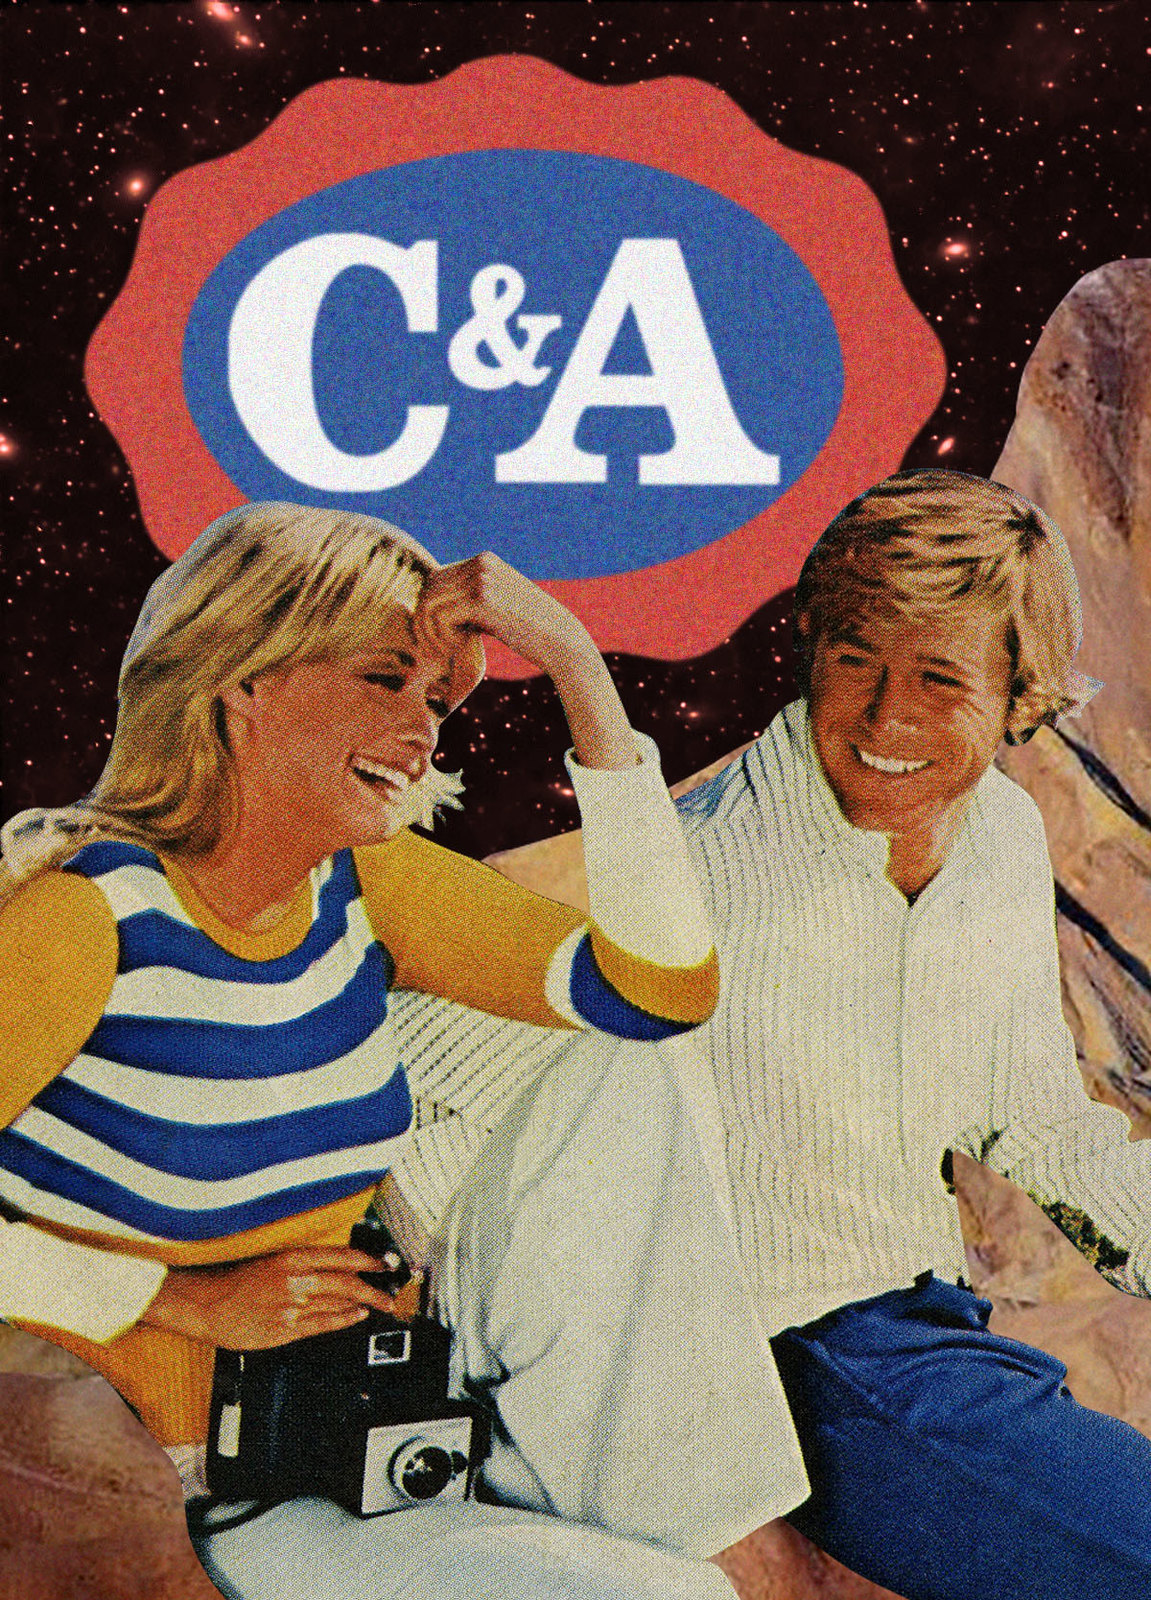 Remember C&A, Tammy Girl and Dolcis? Clothes and Shoe Shops of the Past | Not Dressed As Lamb, over 40 fashion and lifestyle